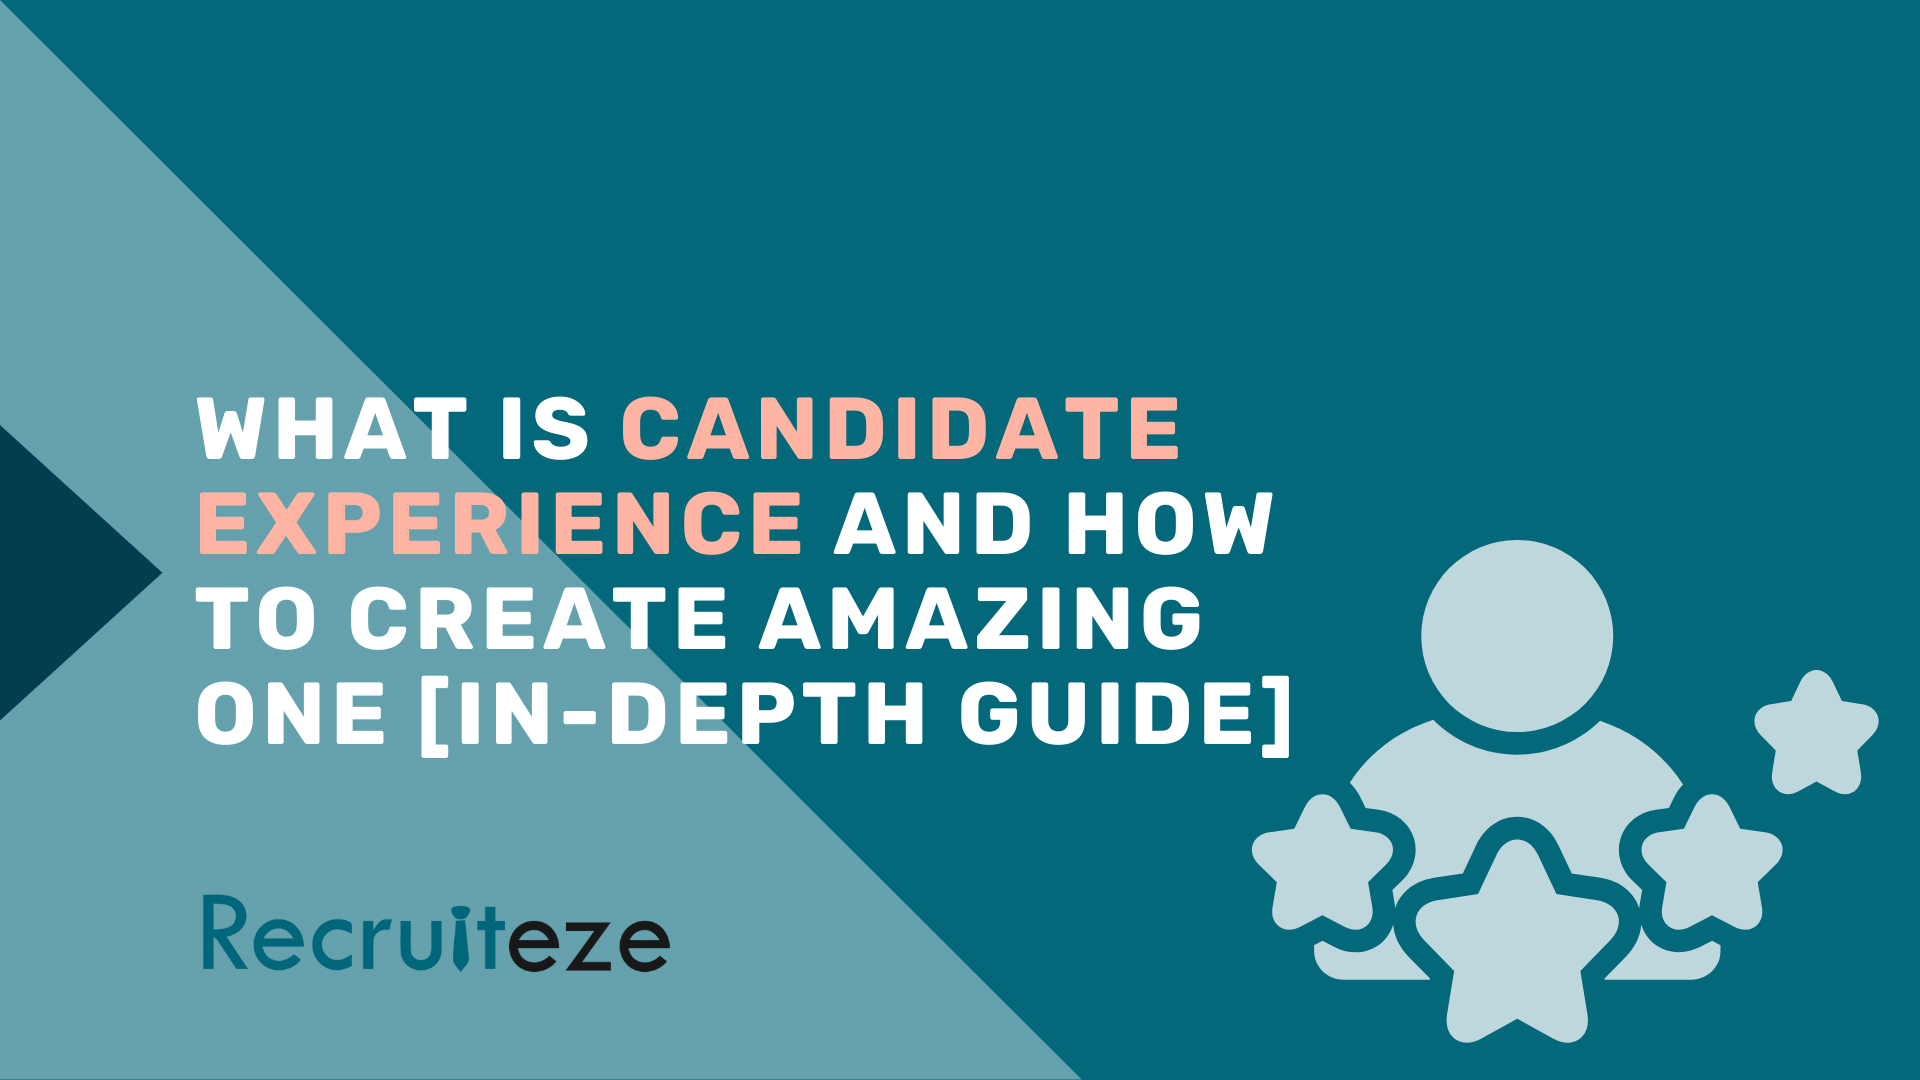 What Is Candidate Experience And How To Create Amazing One [In-depth guide]